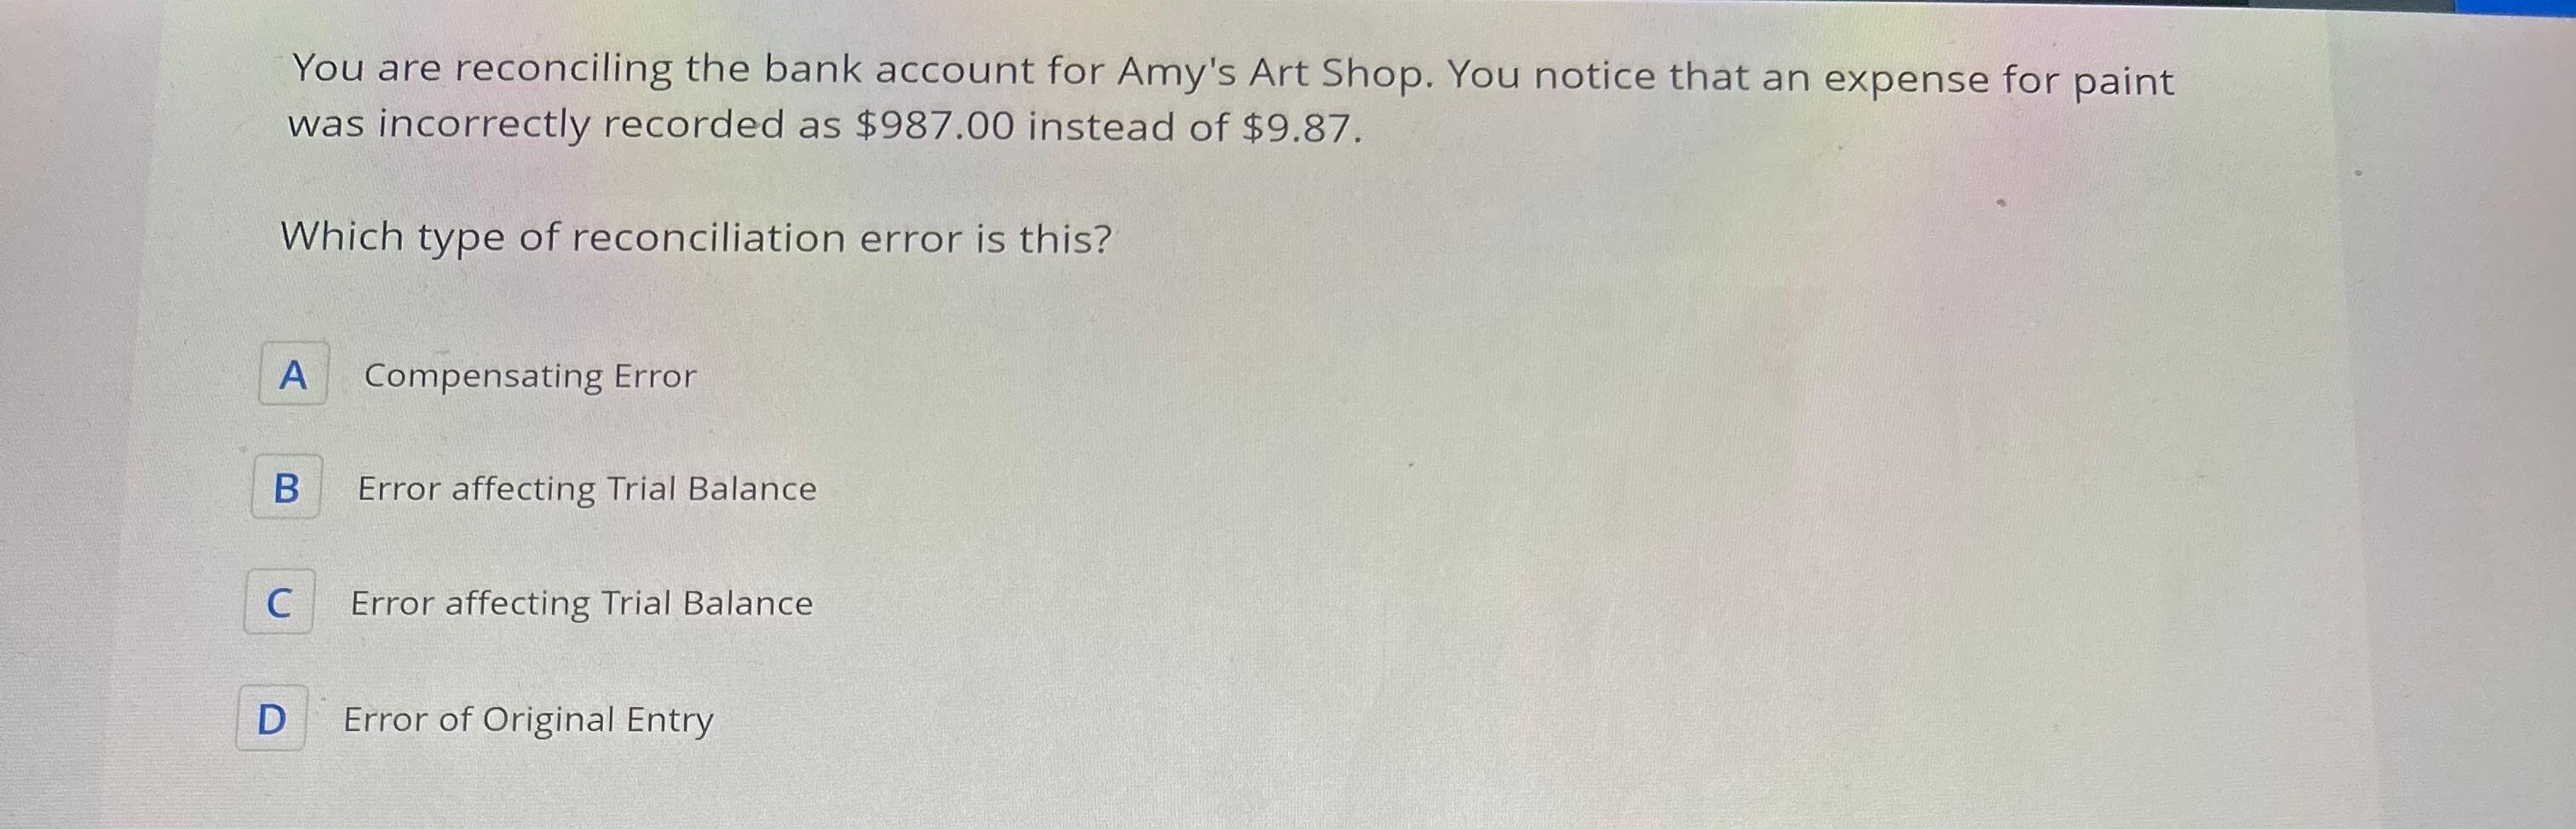 You are reconciling the bank account for Amy's Art Shop. You notice that an expense for paint was incorrectly